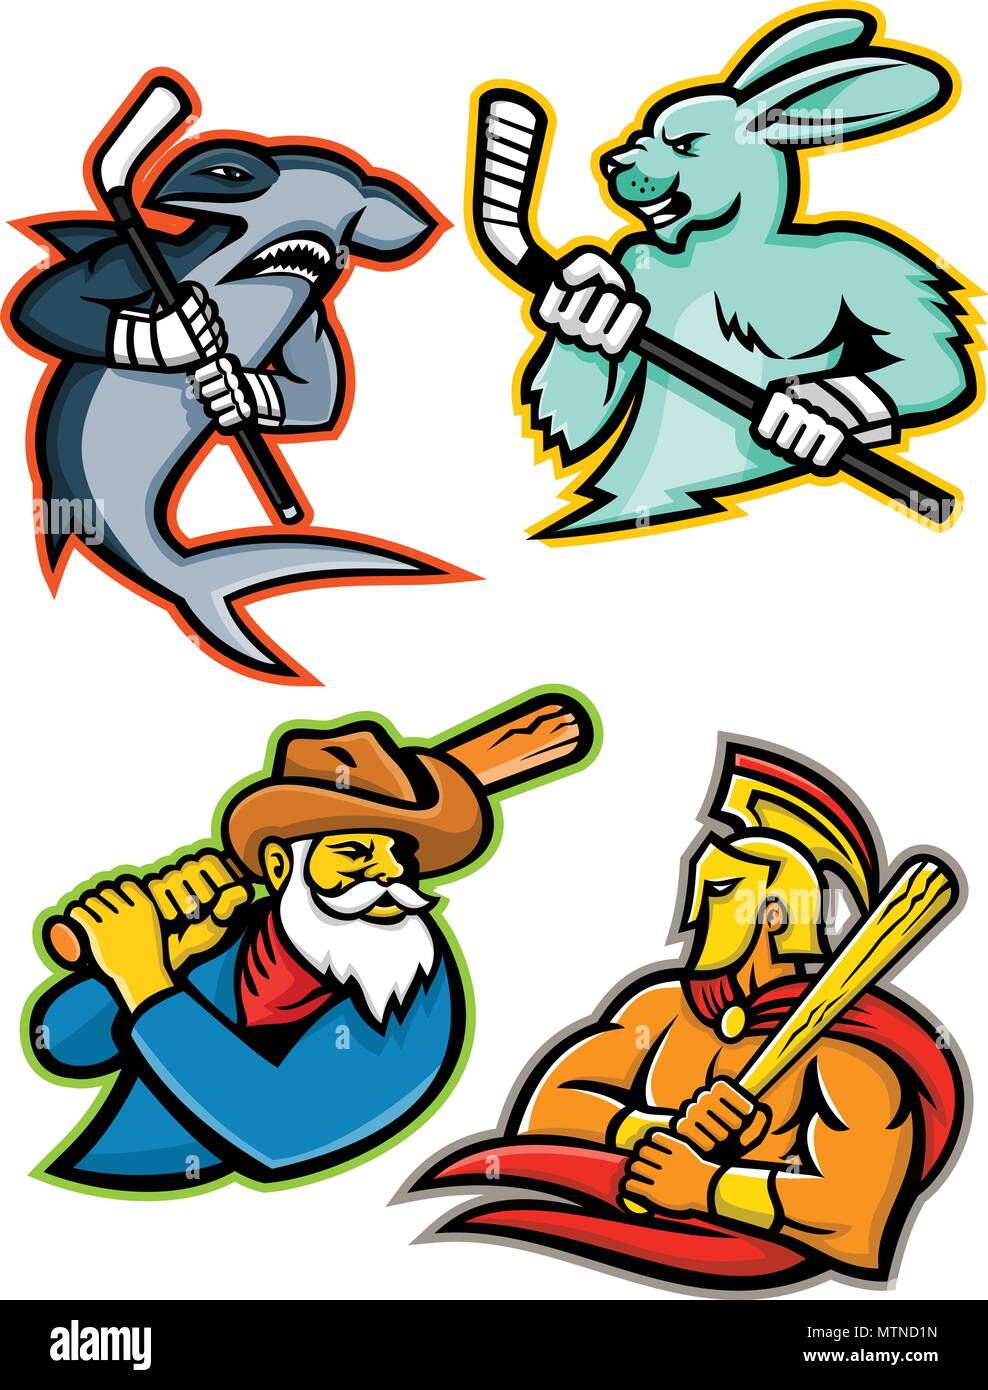 Mascot icon illustration set of  baseball and ice hockey team mascots showing a hammerhead shark and jackrabbit or hare ice hockey player, miner and T Stock Vector